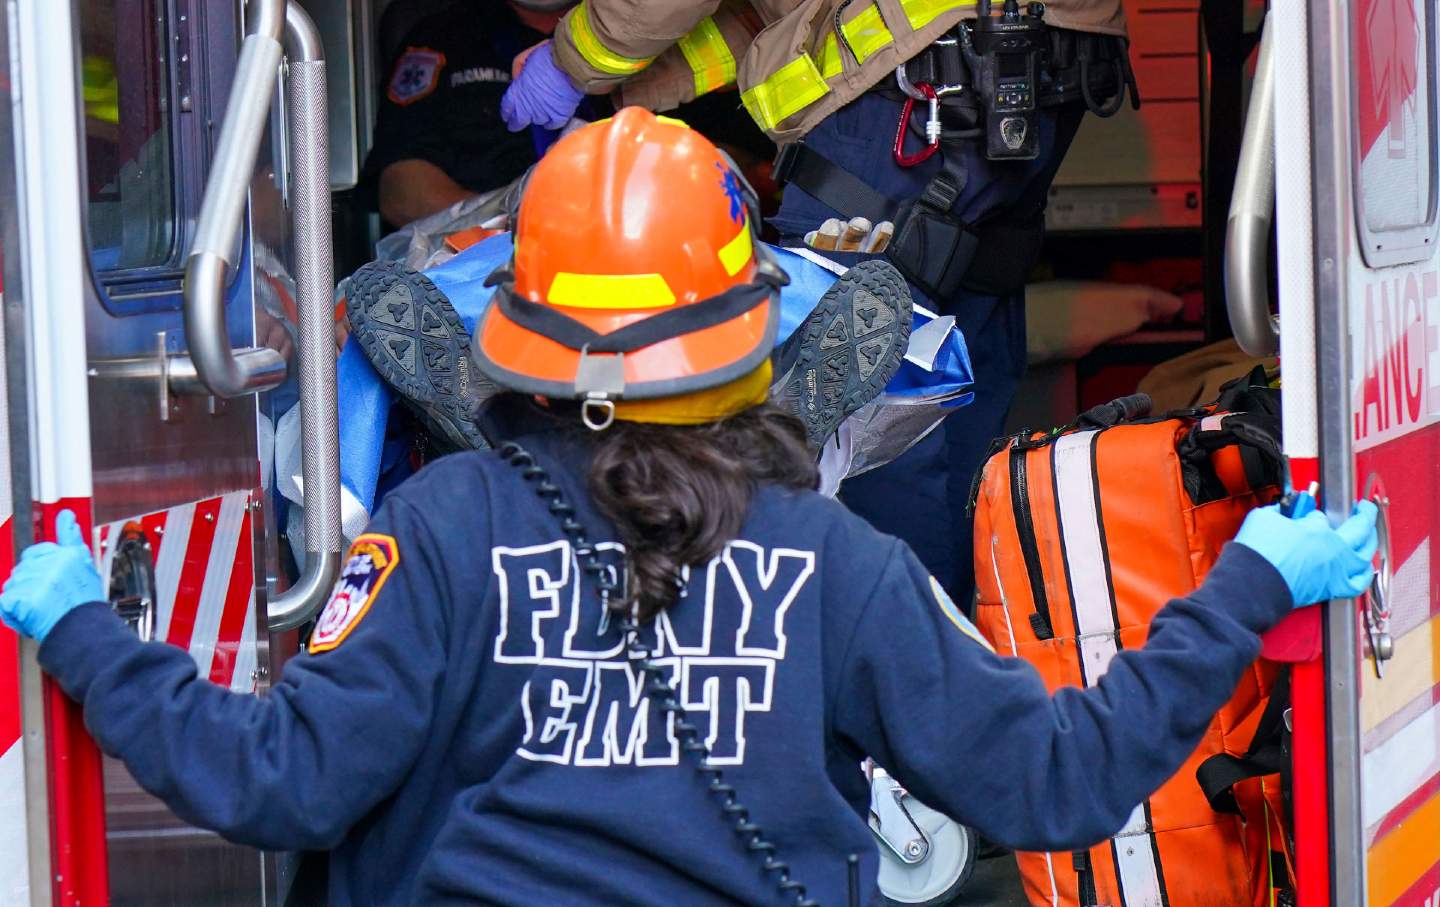 Construction workers FDNY ambulance